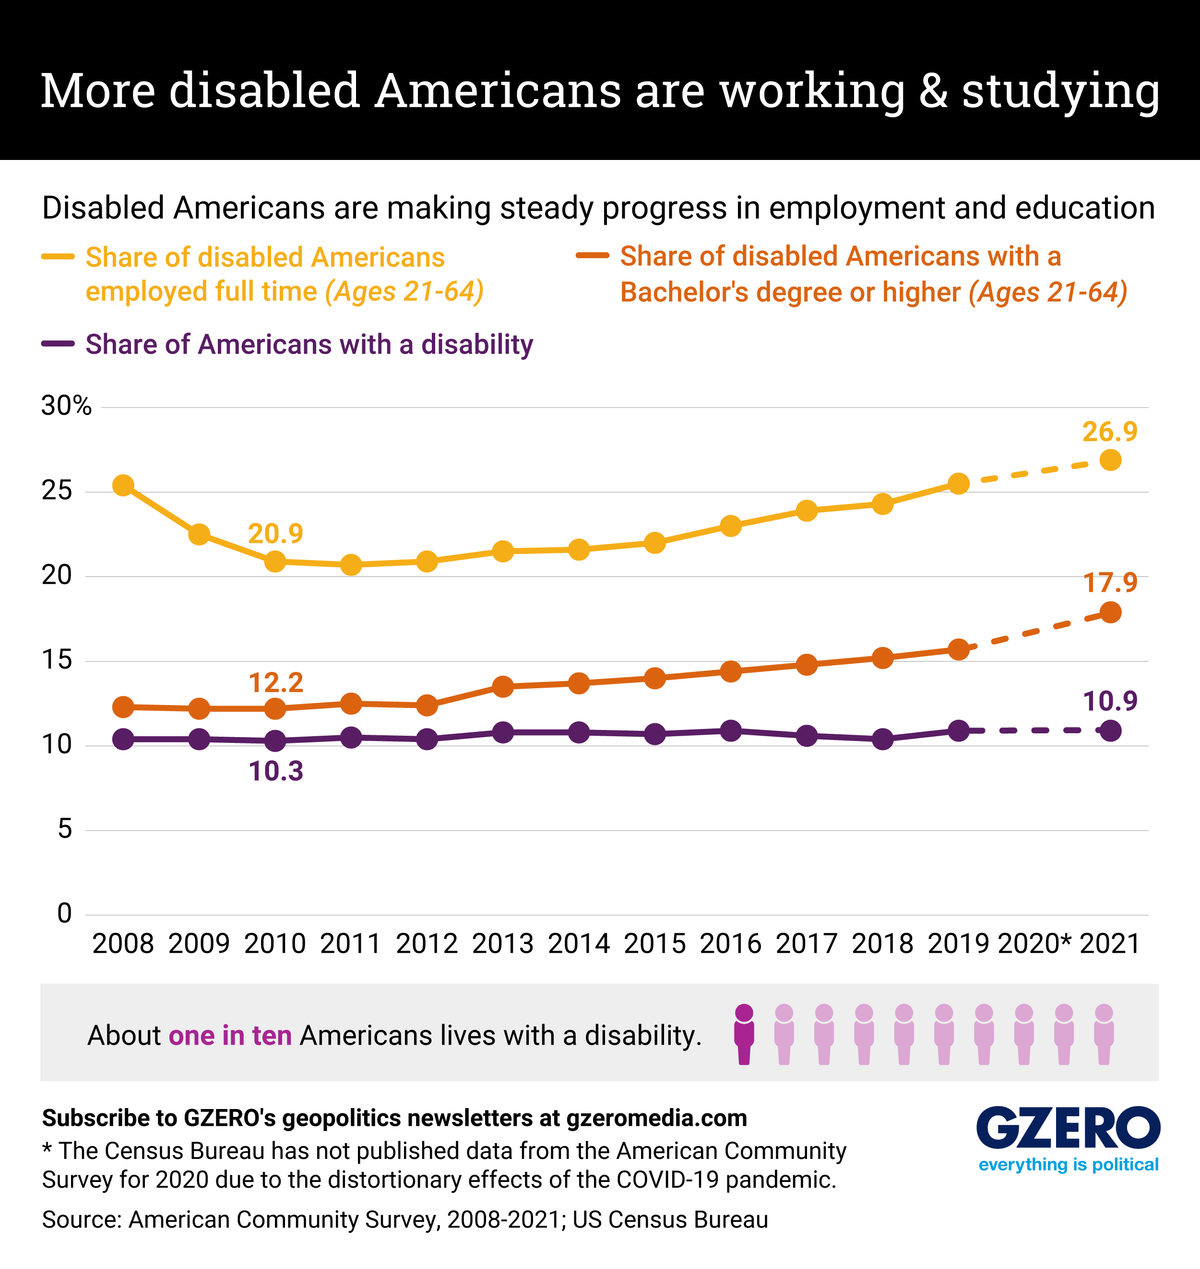 The Graphic Truth: More disabled Americans are working and studying